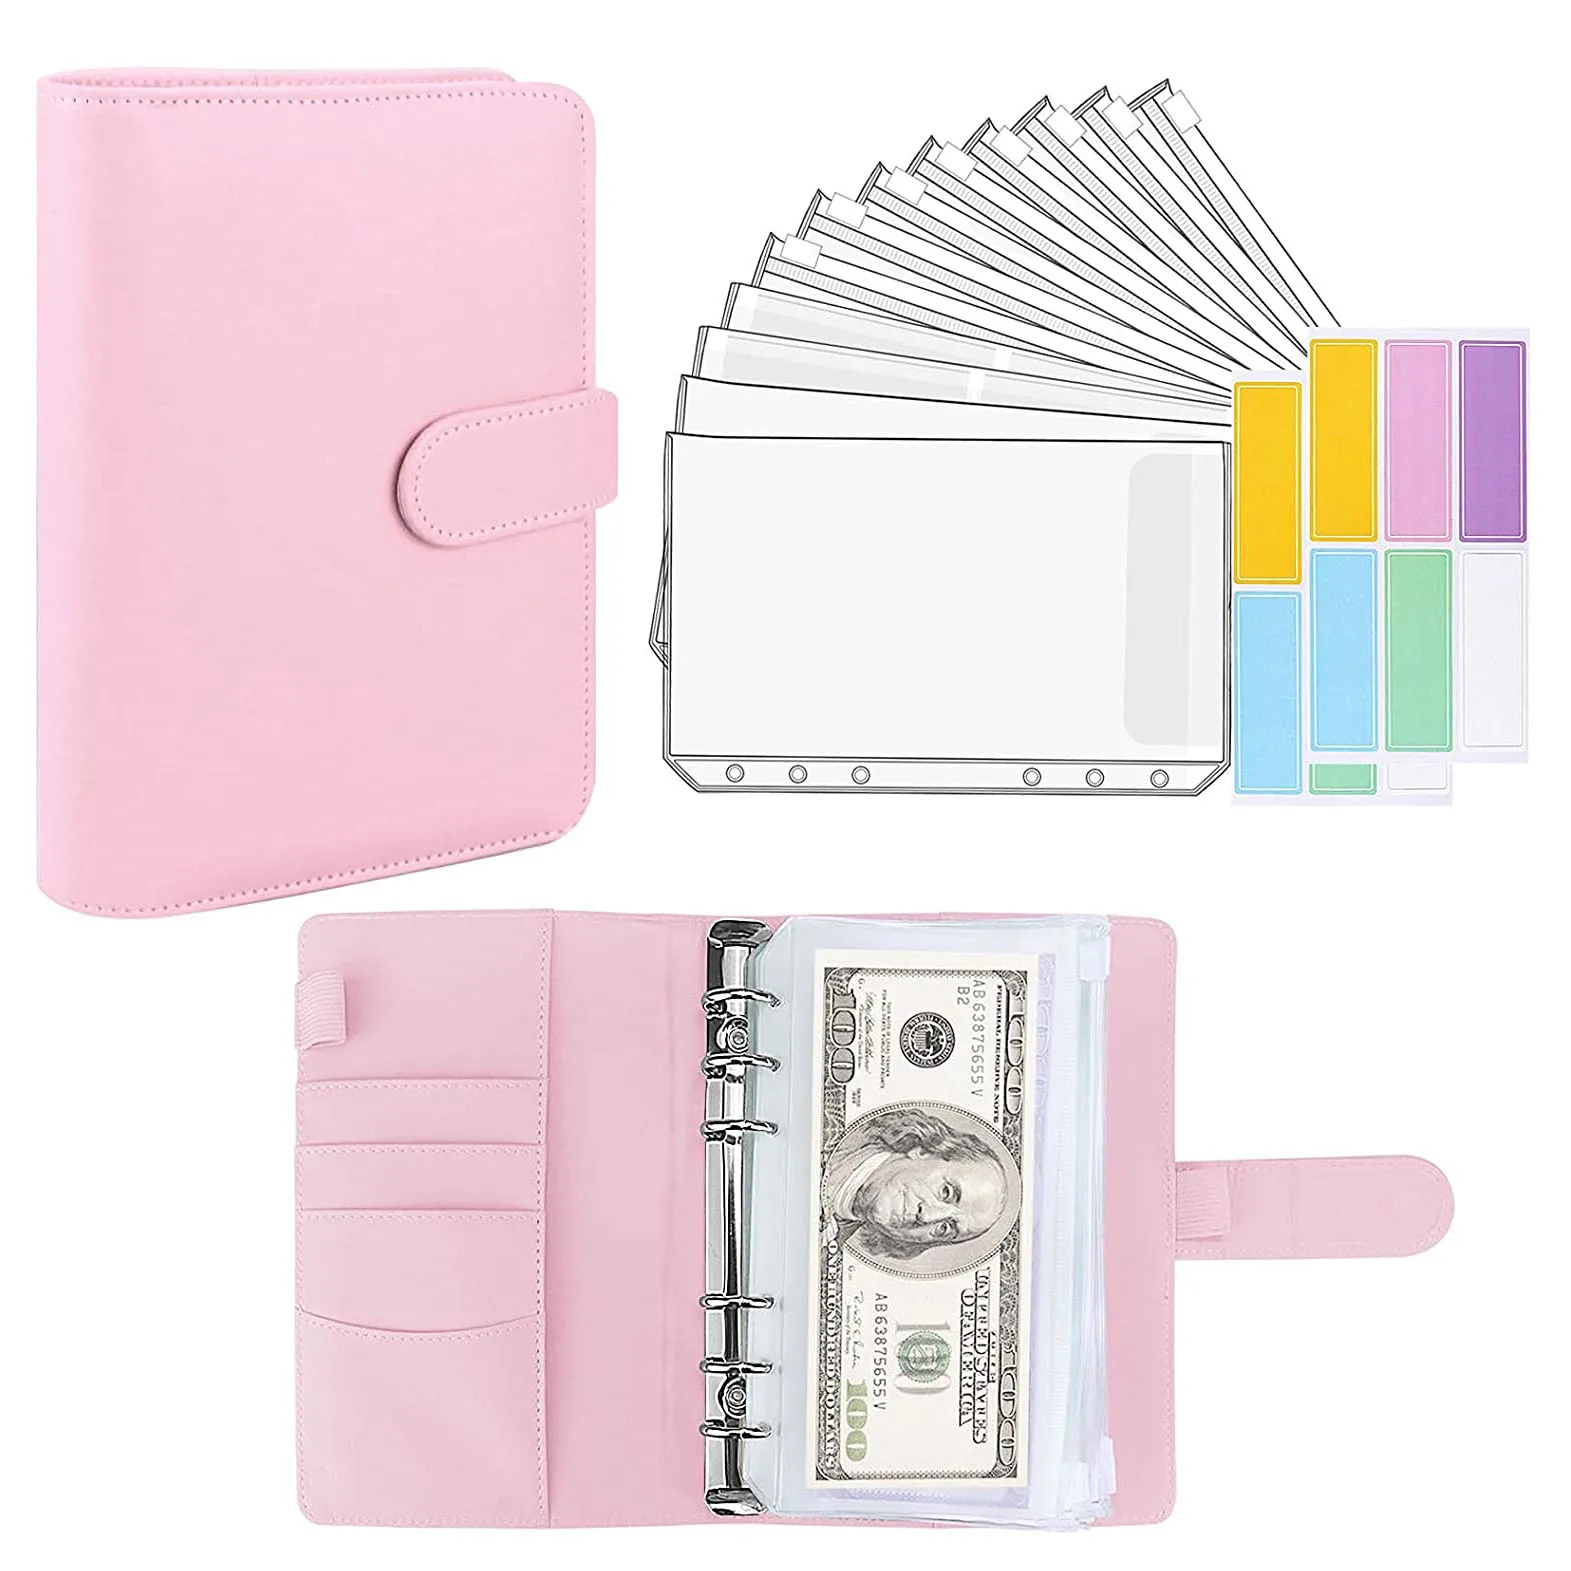 15 Pieces A6 Binder Budget Planner Cash Envelope System with Budget Envelopes Binder Pockets Cash Envelope Wallet for Budgeting 12 pieces a5 size pvc 6 holes binder budget zipper pockets wallet waterproof document bag for a5 binder notebook filing bags